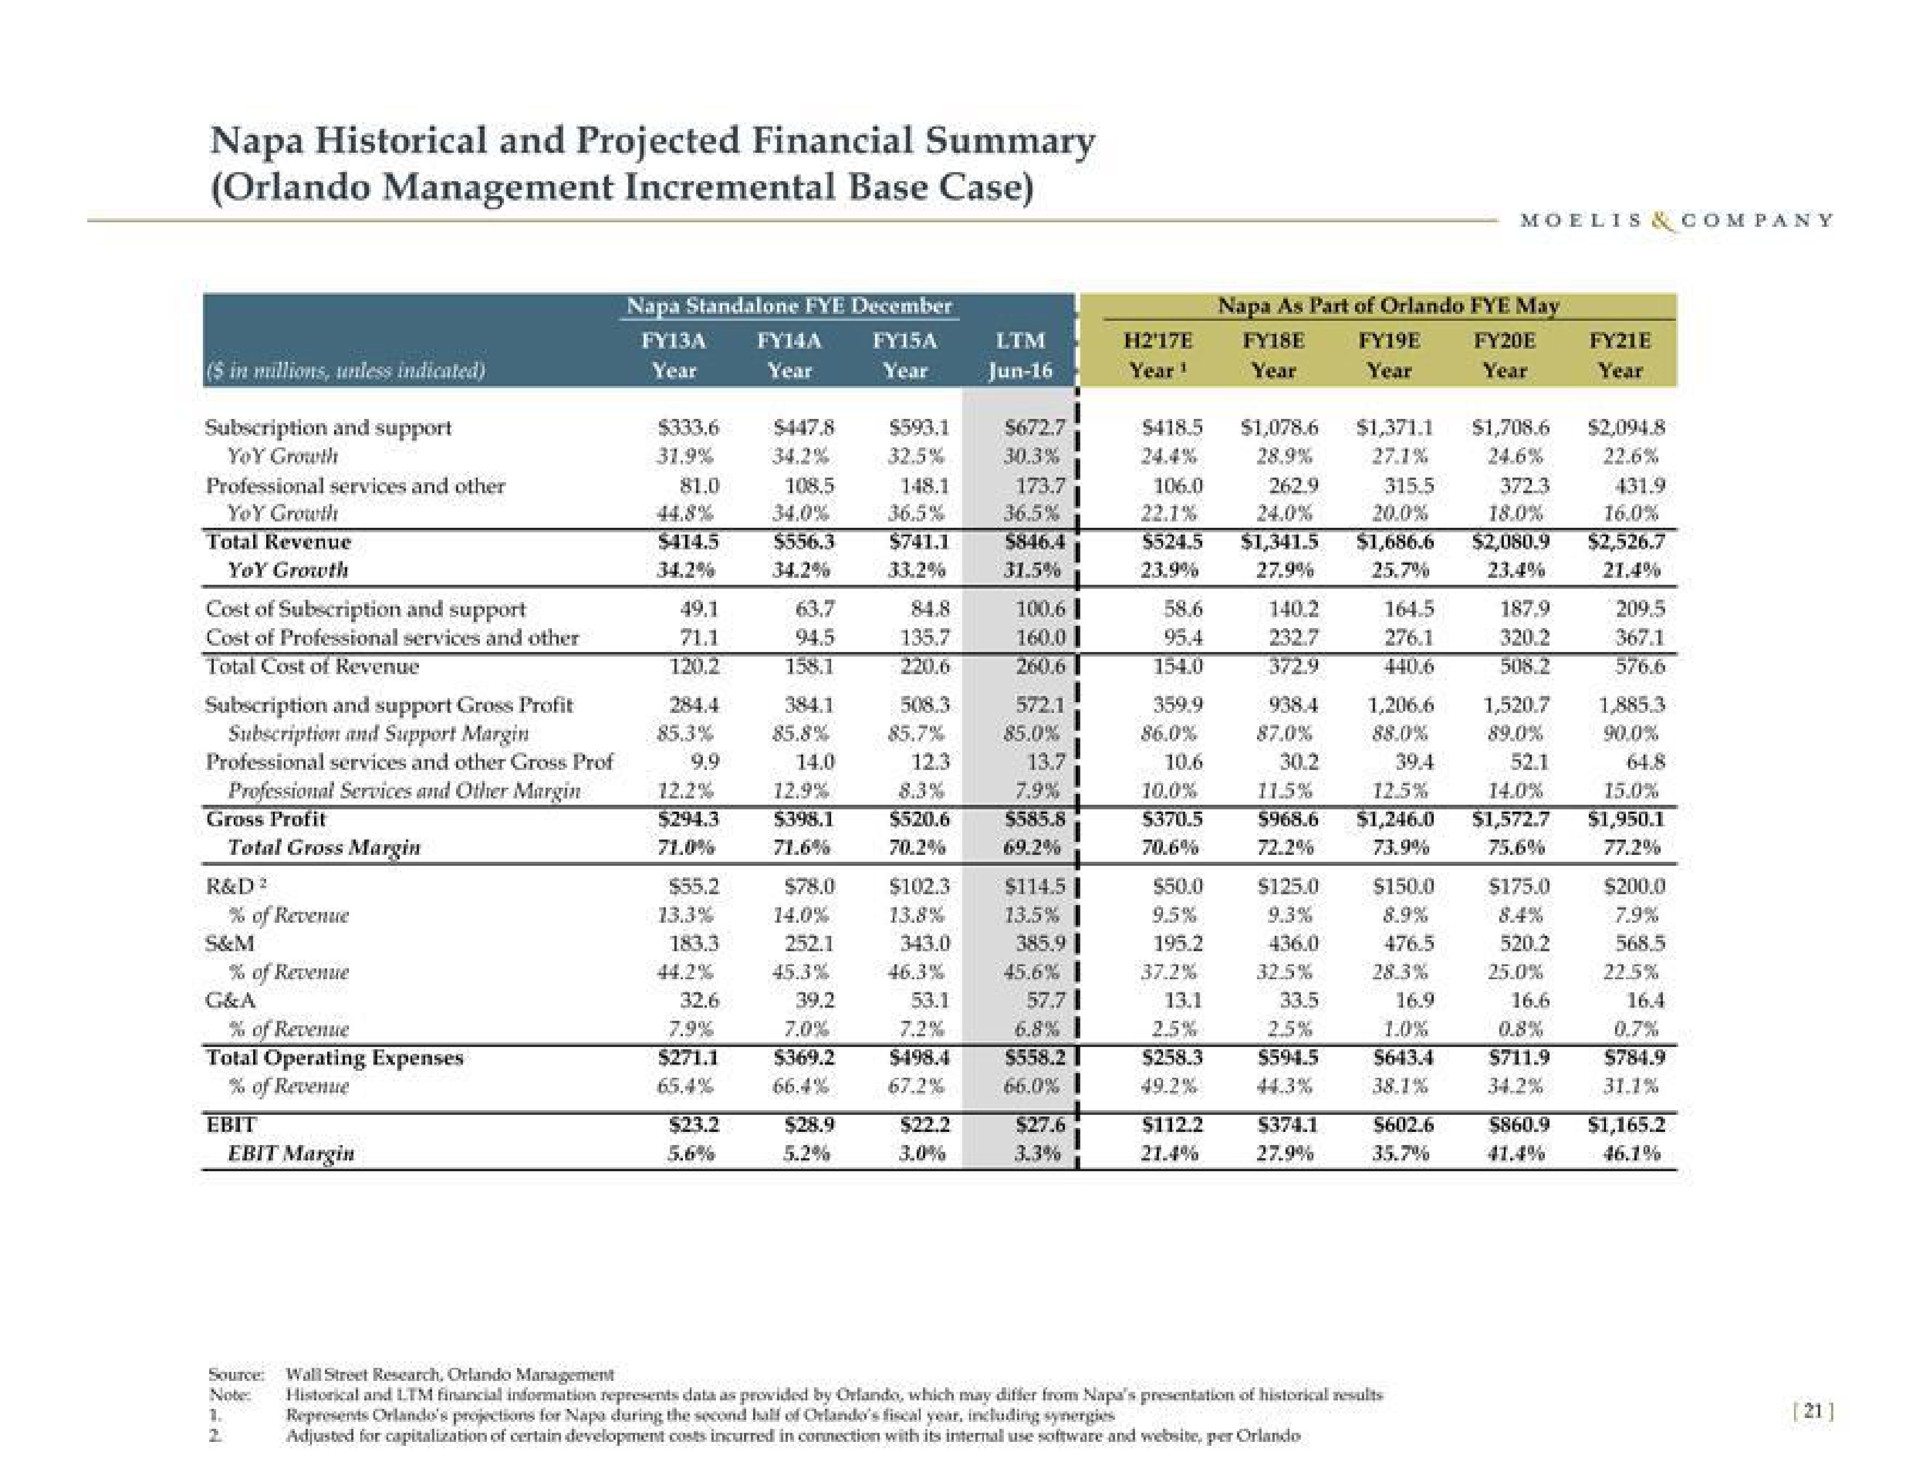 napa historical and projected financial summary management incremental base case margin at | Moelis & Company